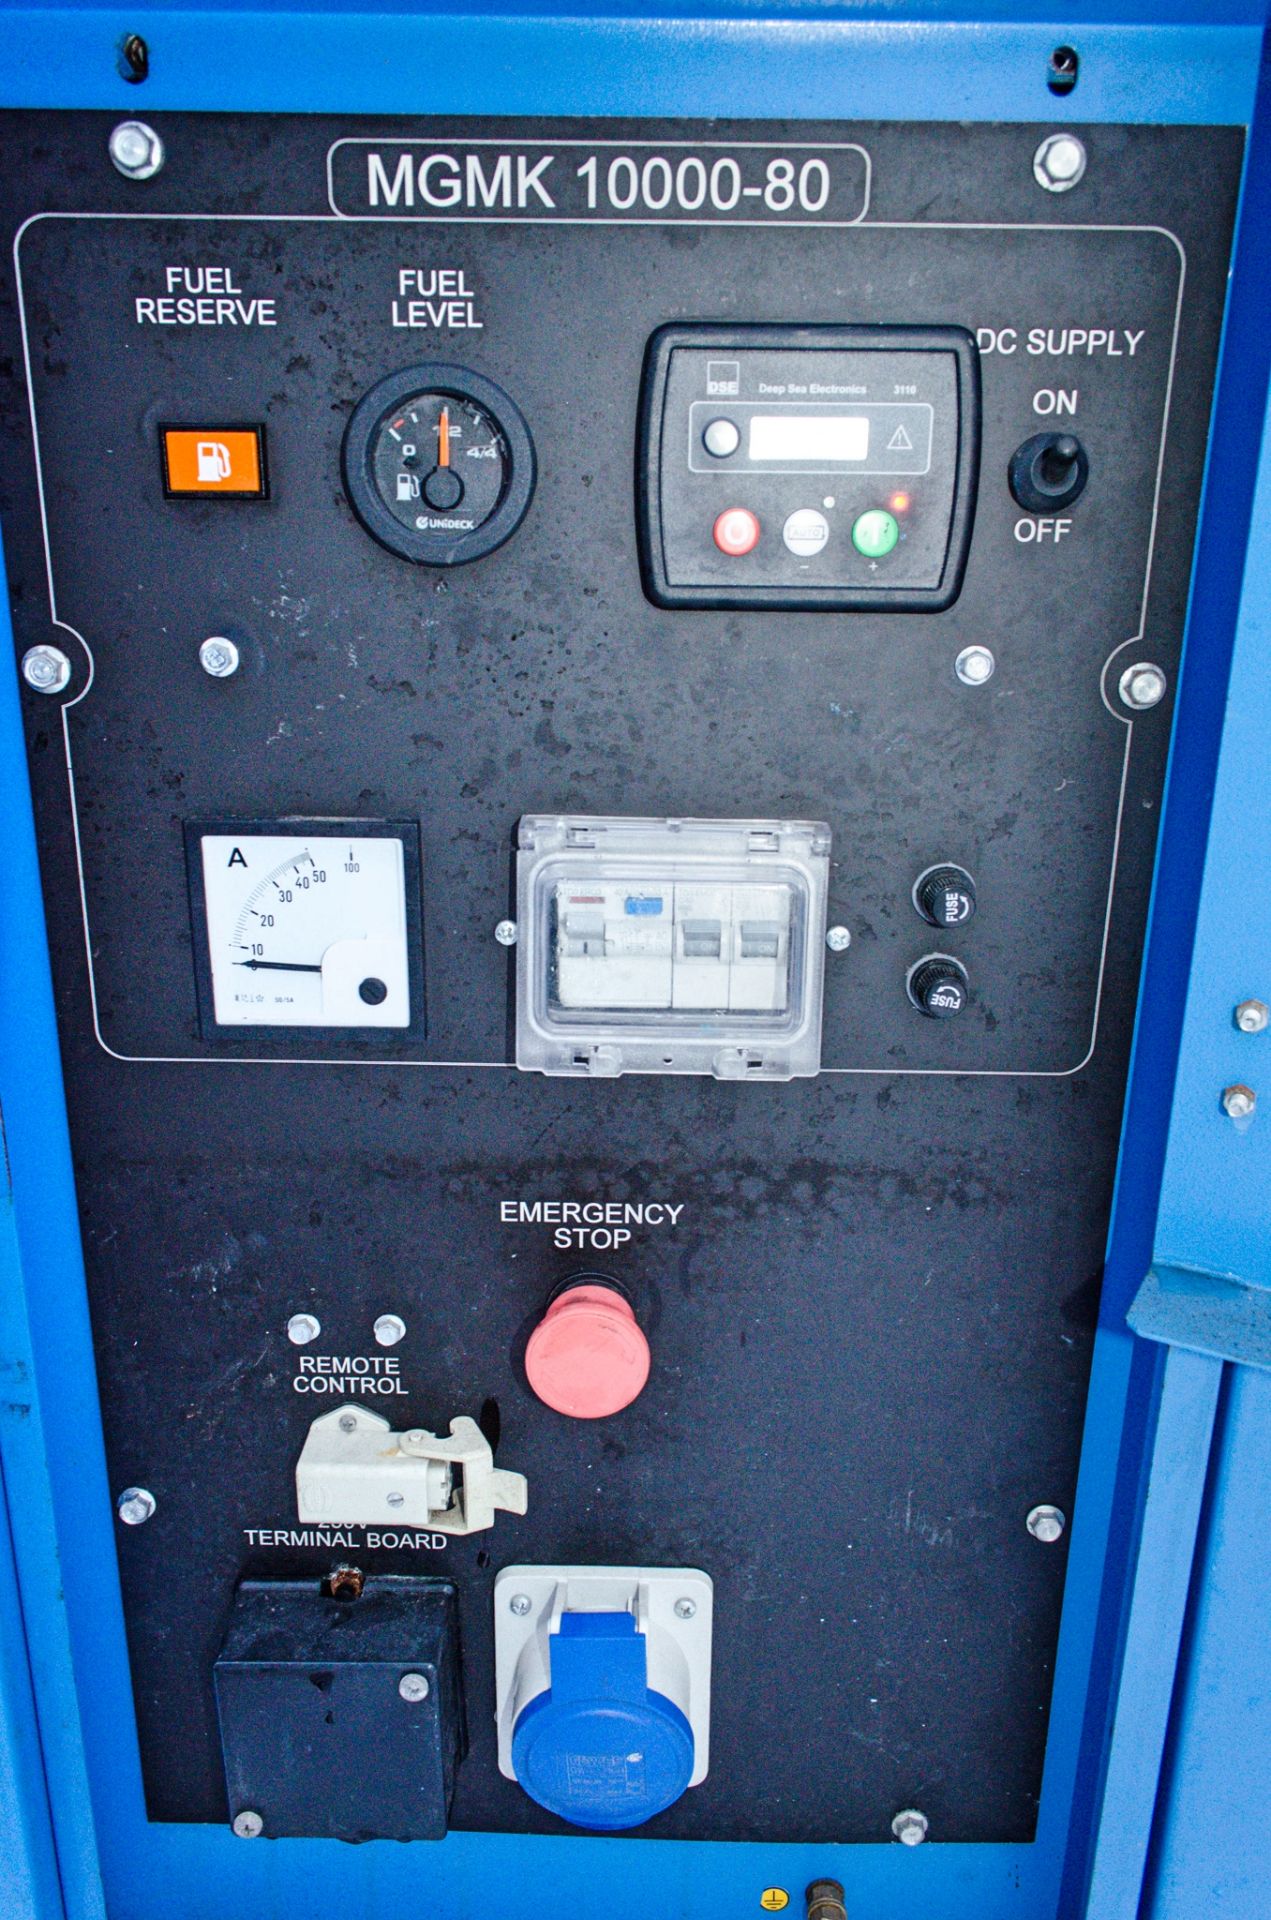 Genset MGMK 10000 10 kva static diesel driven generator Recorded Hours: 1547 MS5052 - Image 5 of 5